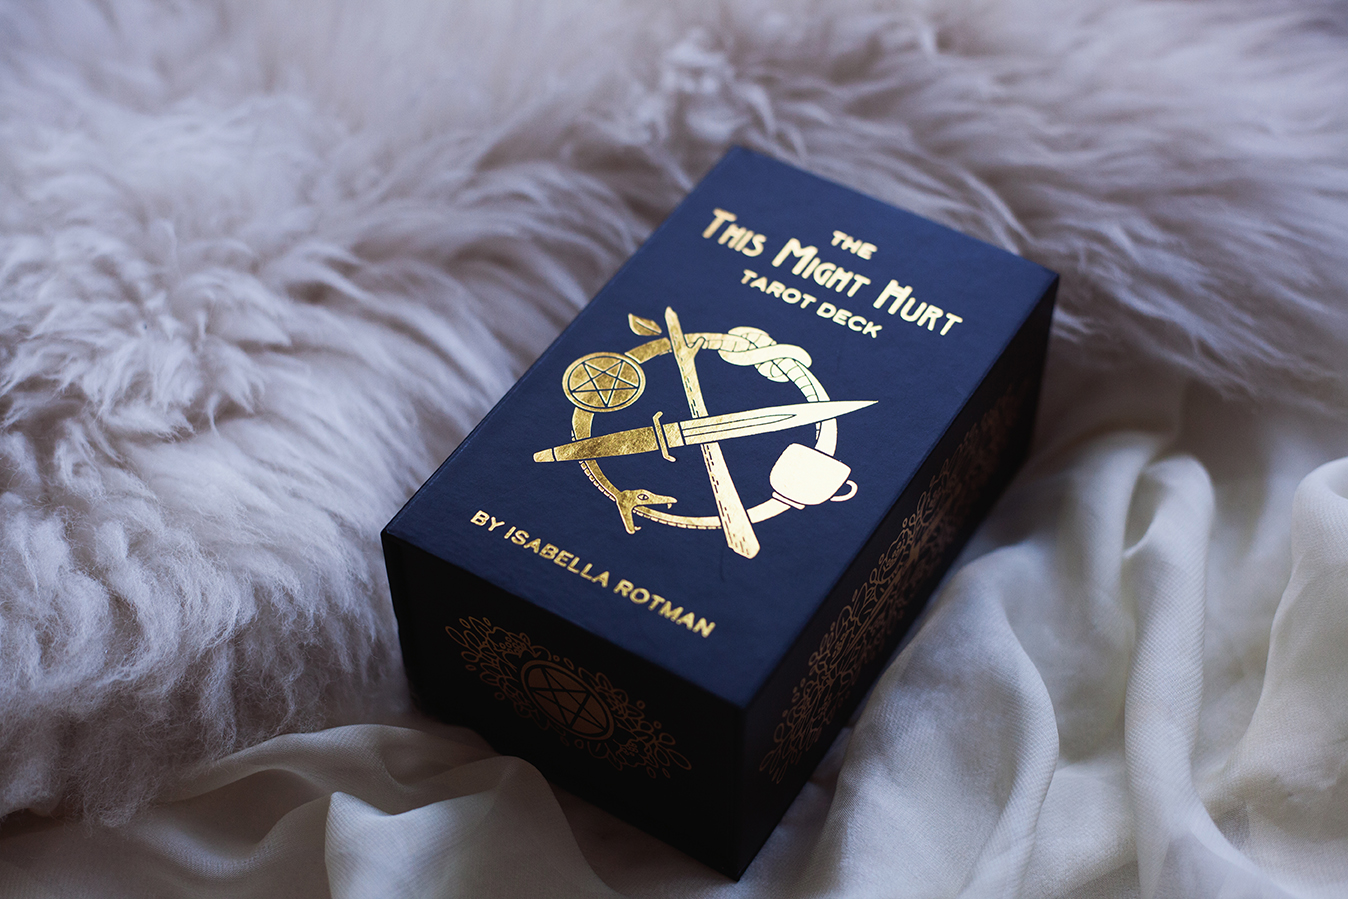  Image shows the front of This Might Hurt Tarot box on a background of white cloth and fur. Box is black with title and logo in gold foil. First printing. 